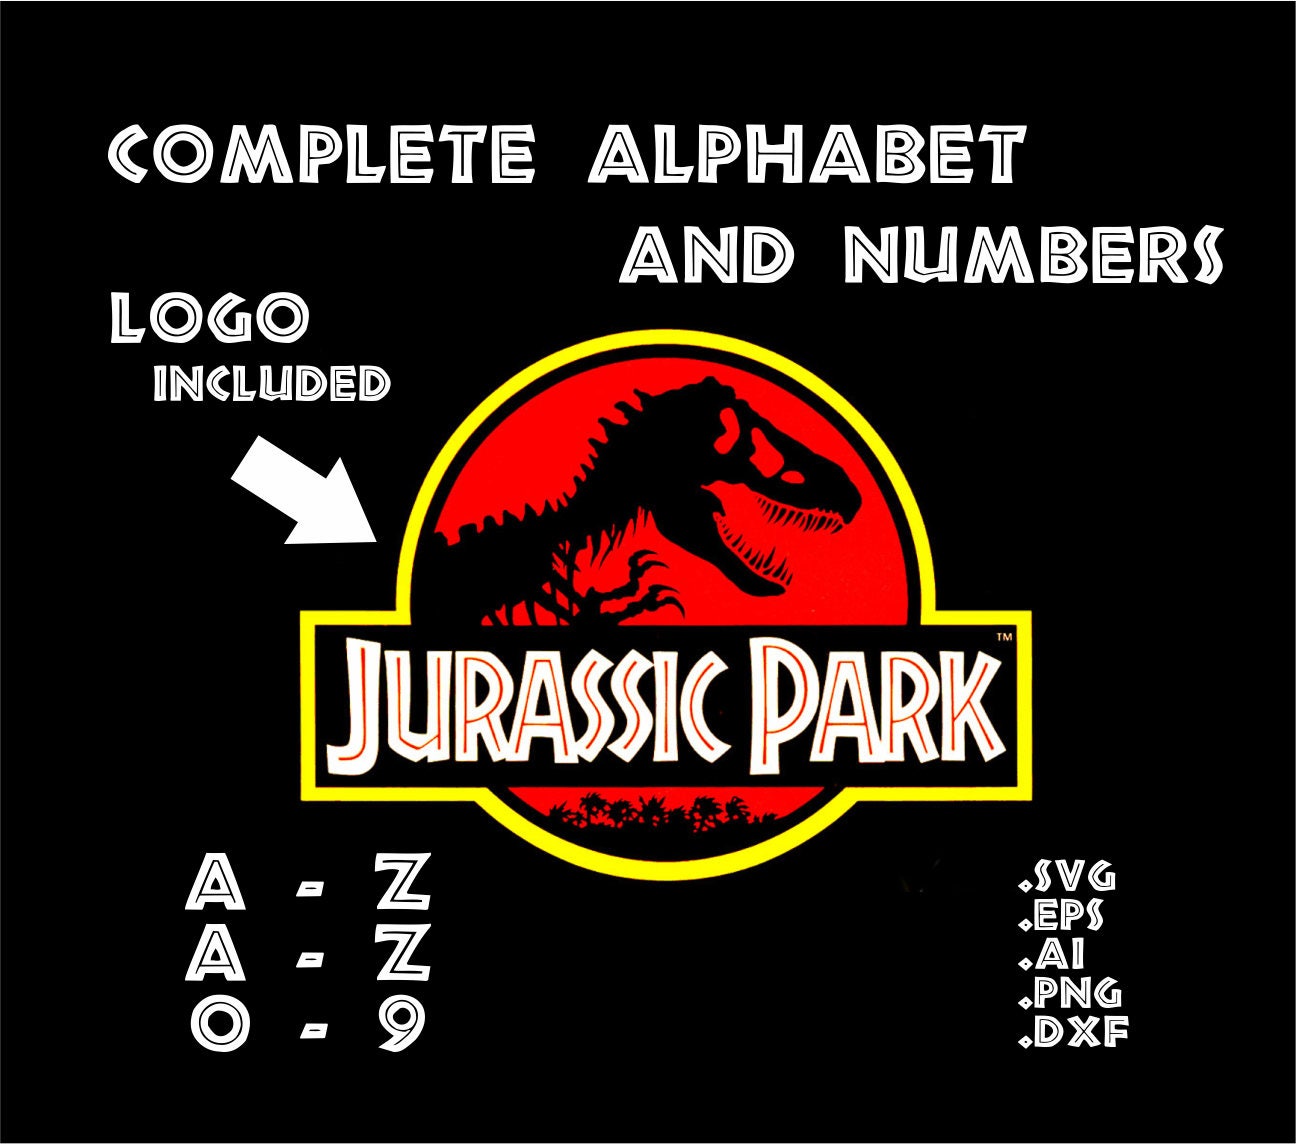 Download Jurassic Park complete alphabet and numbers in svg, eps ...